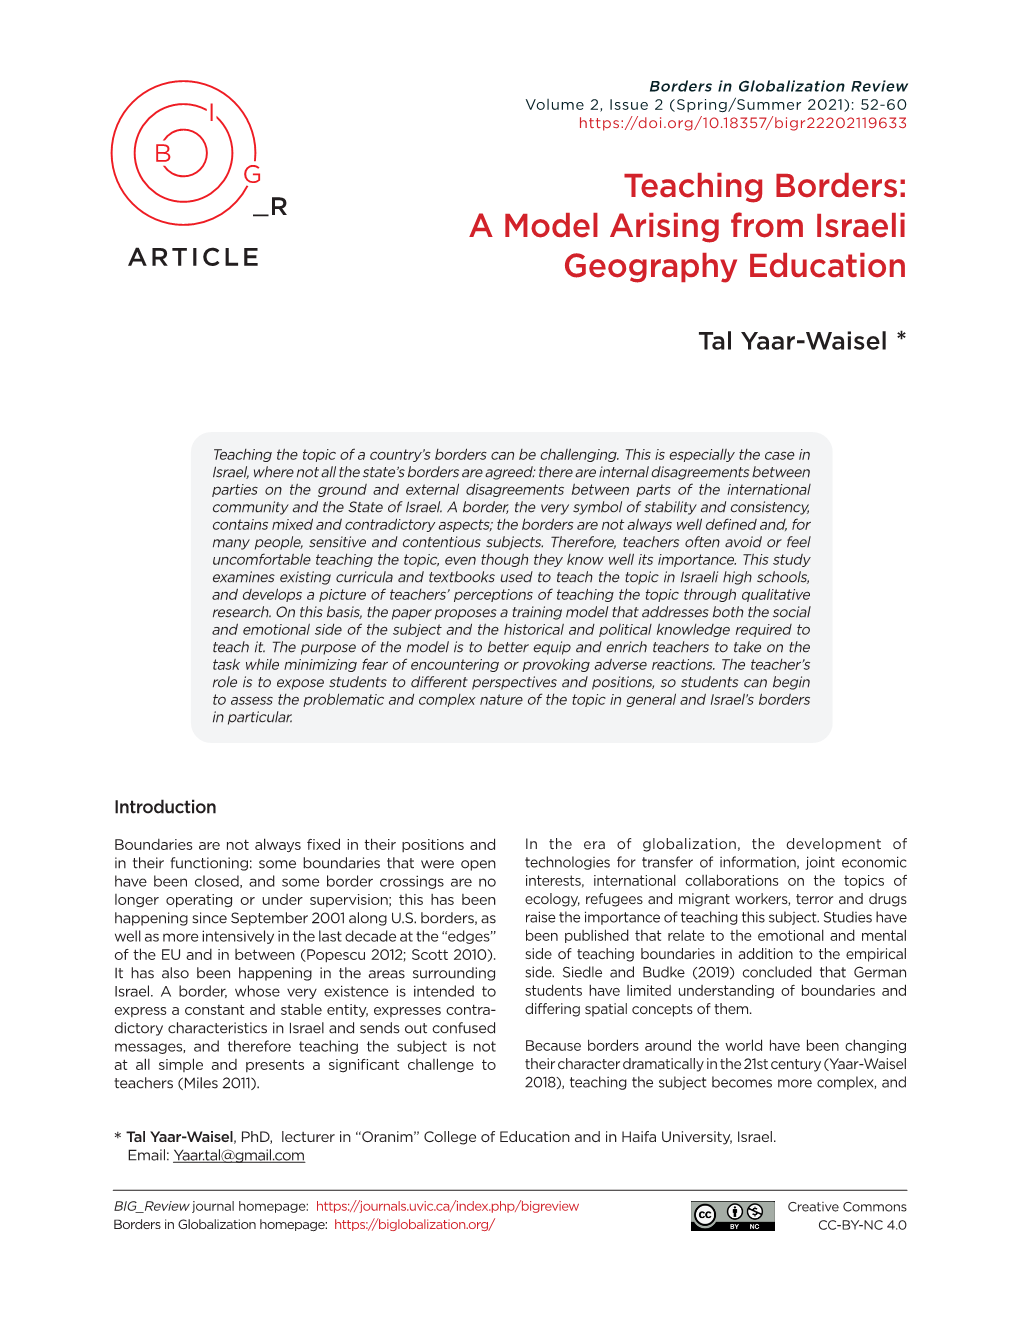 Teaching Borders: a Model Arising from Israeli Geography Education”